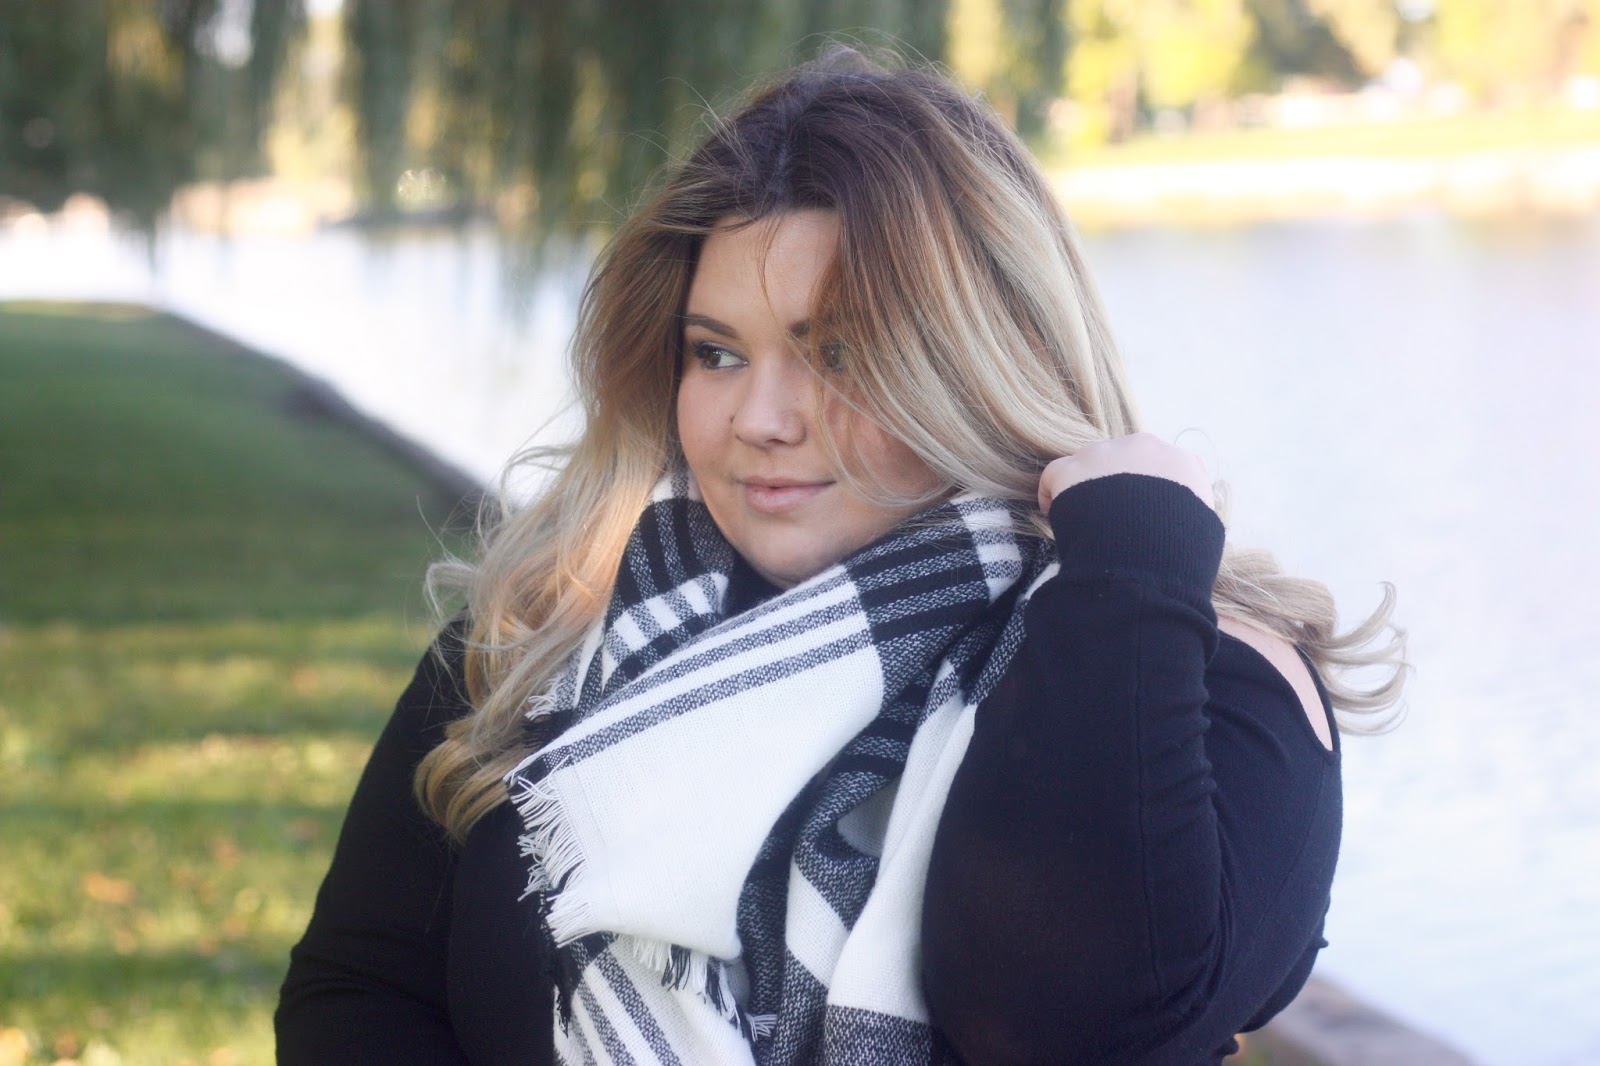 blanket scarf, meijer, meijer style, cargo skinny jeans, plus size style, plus size fashion, cold shoulder trend, sweater cut-out, natalie craig, natalie in the city, wide calf knee high boots, fashion blogger, chicago blogger, midwest blogger, plus size blogger, fall fashion 2016